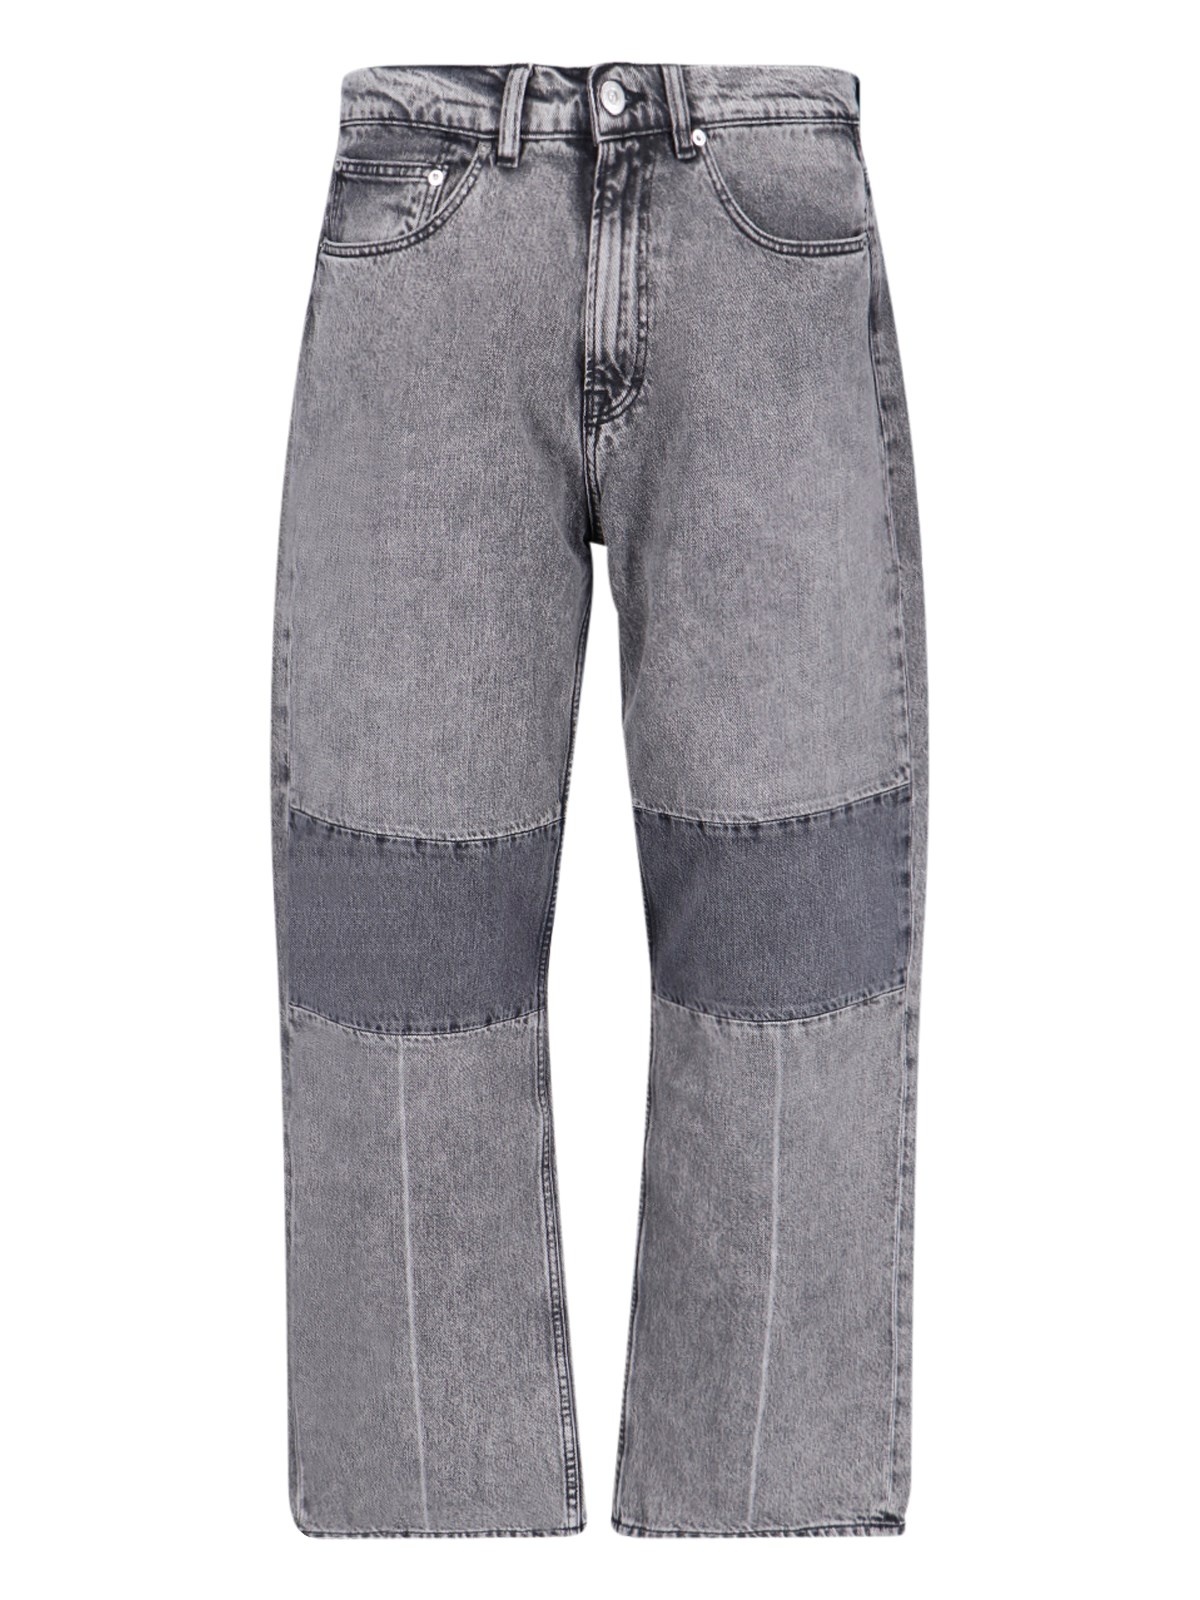 "EXTENDED THIRD CUT" JEANS - 1